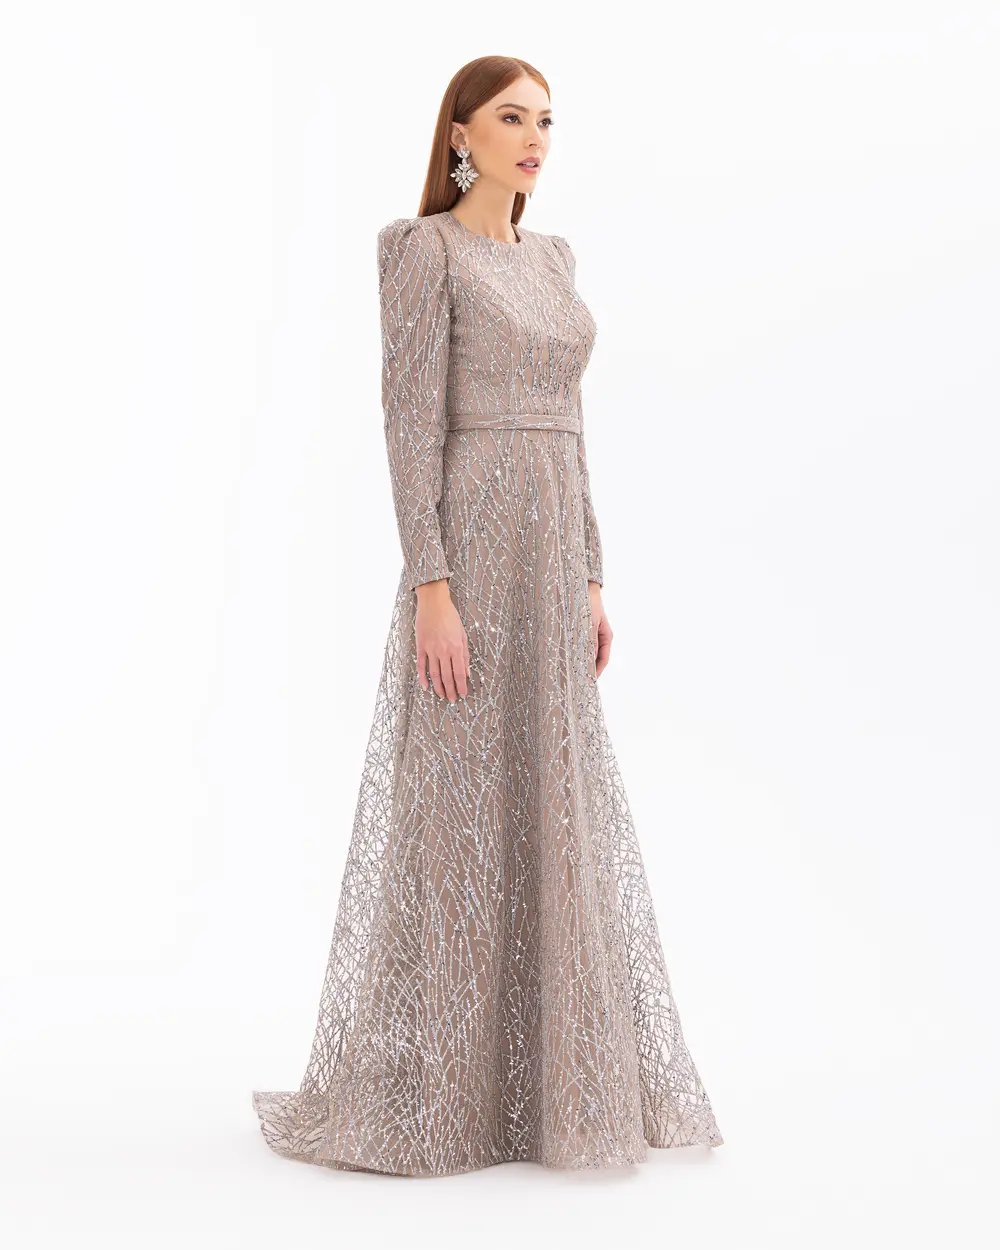 Belted Maxi Length Silvery Long Sleeve Evening Dress